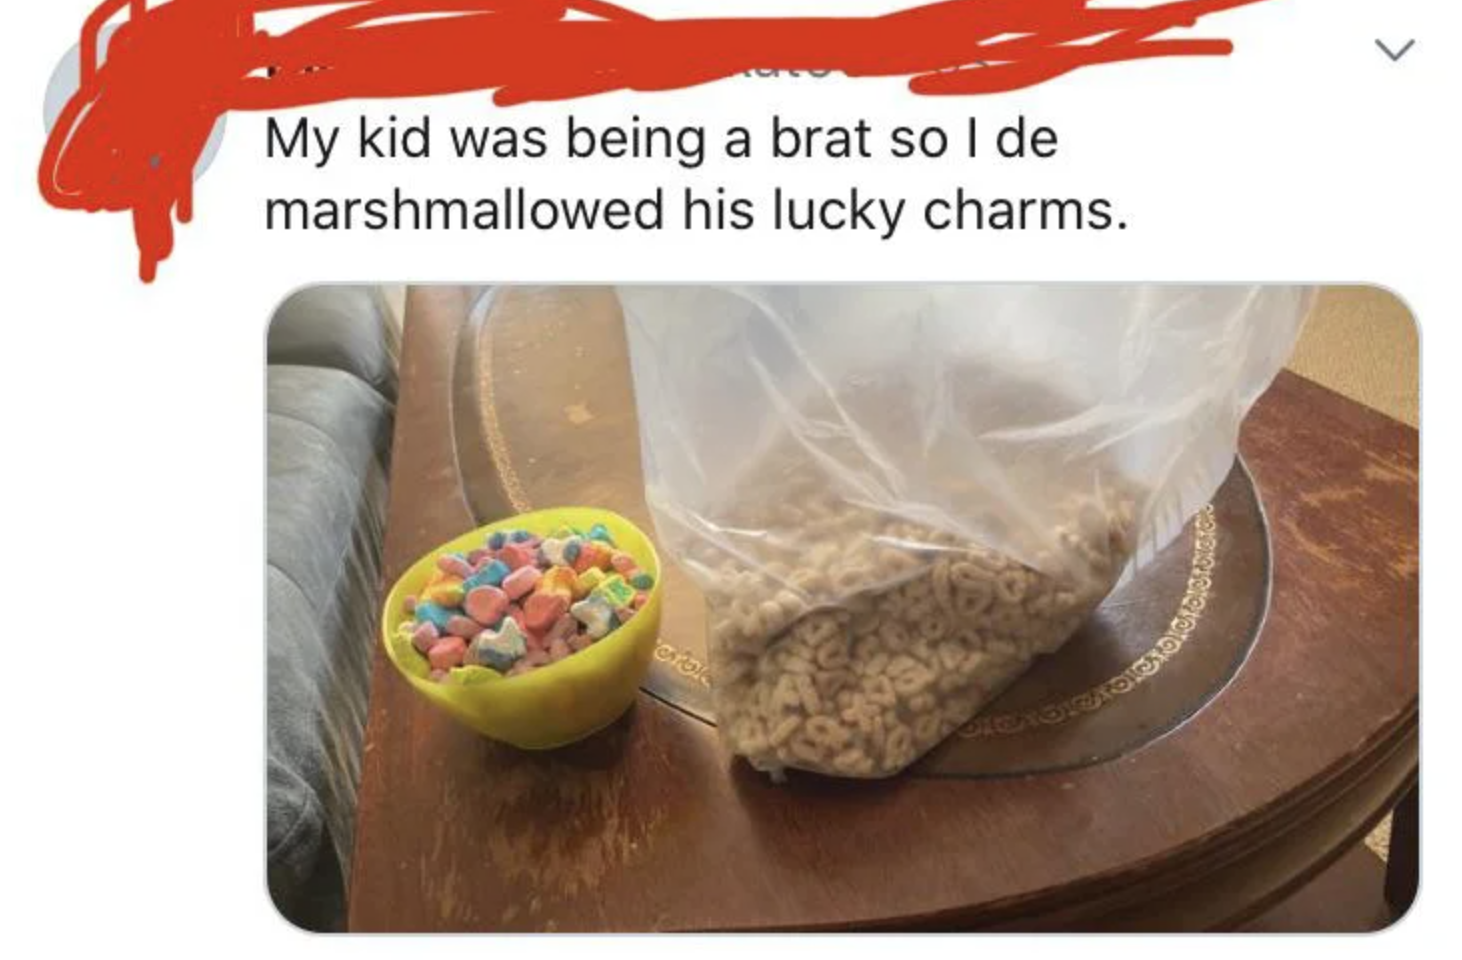 A person who took the marshmallows out of a cereal box because their child was rude